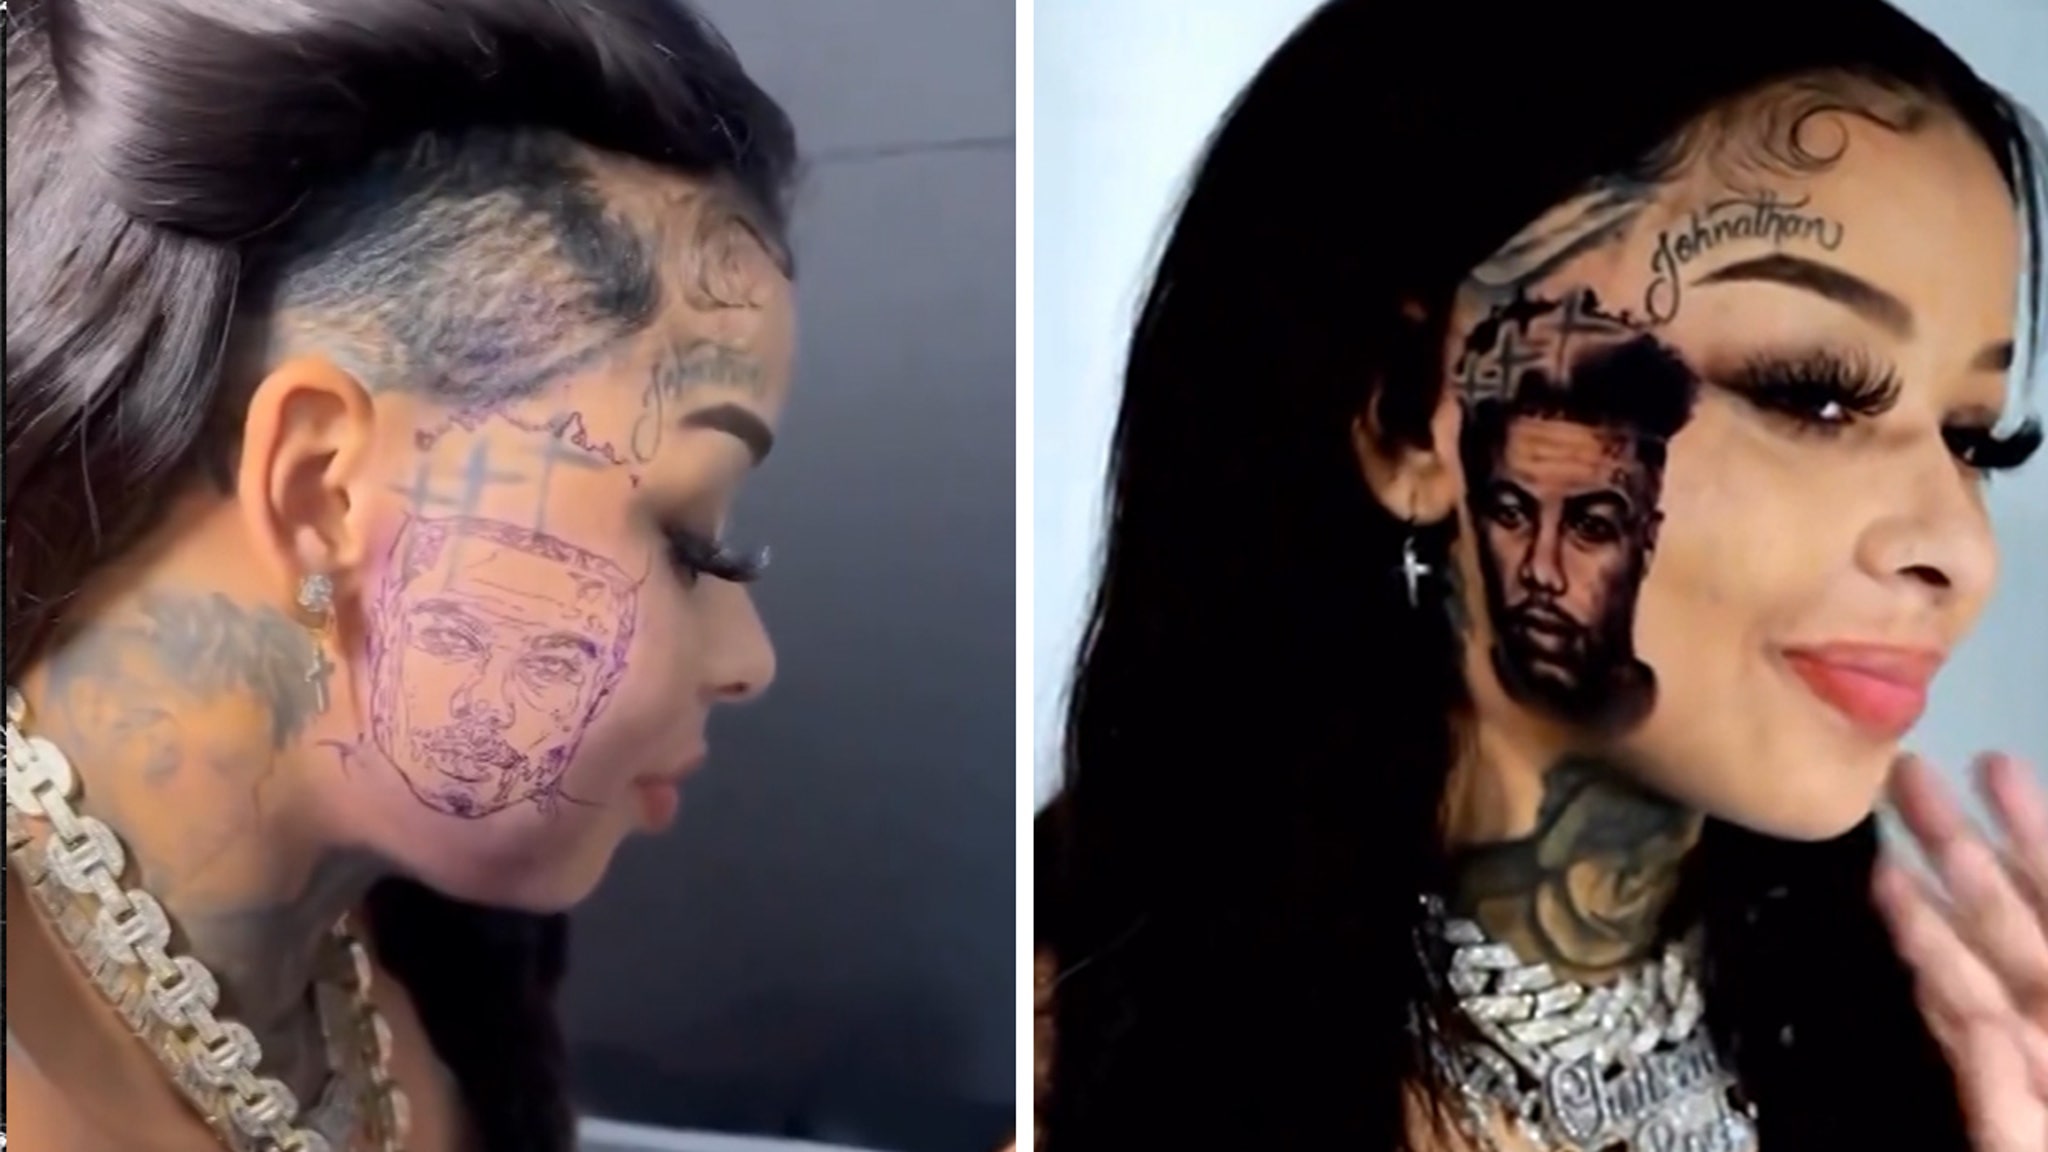 Girlfriend Face Tattoo On Chest #shorts #shortvideo - YouTube